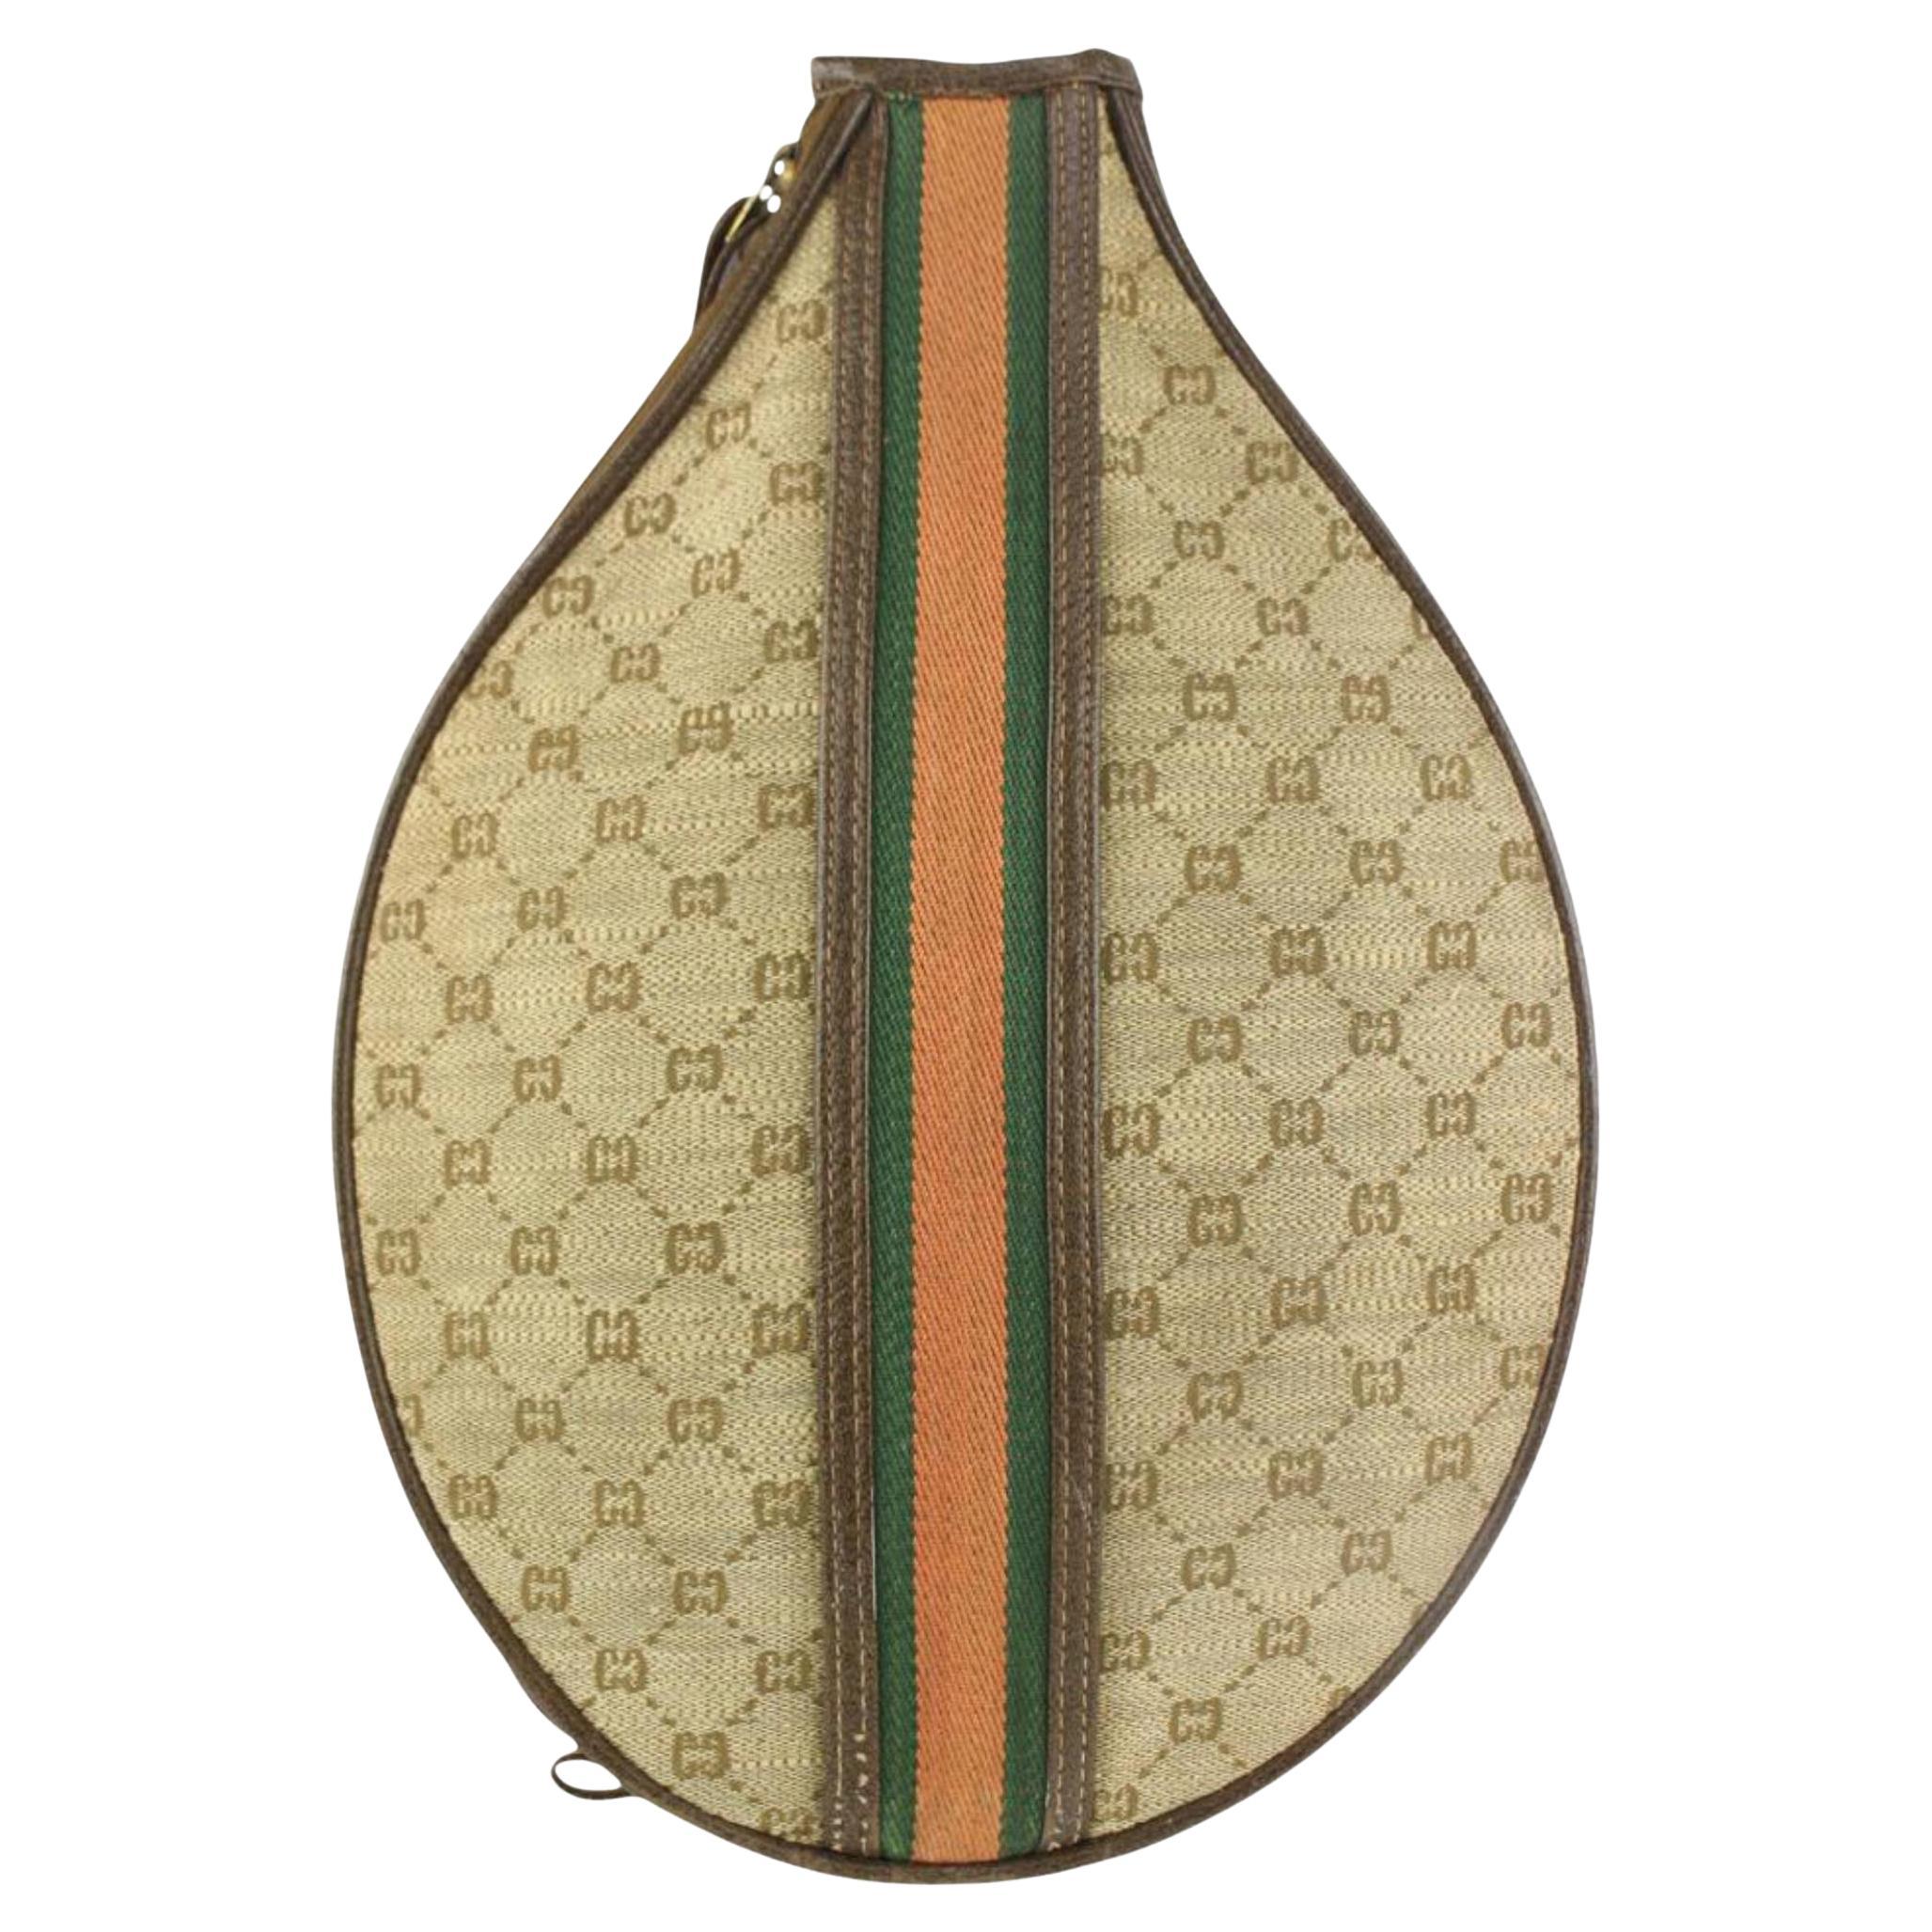 Sold at Auction: GUCCI AND LOUIS VUITTON. 1) BLUE LEATHER GUCCI TENNIS  RACQUET BAG. FIRST TIME I SAW ONE OF THESE WAS